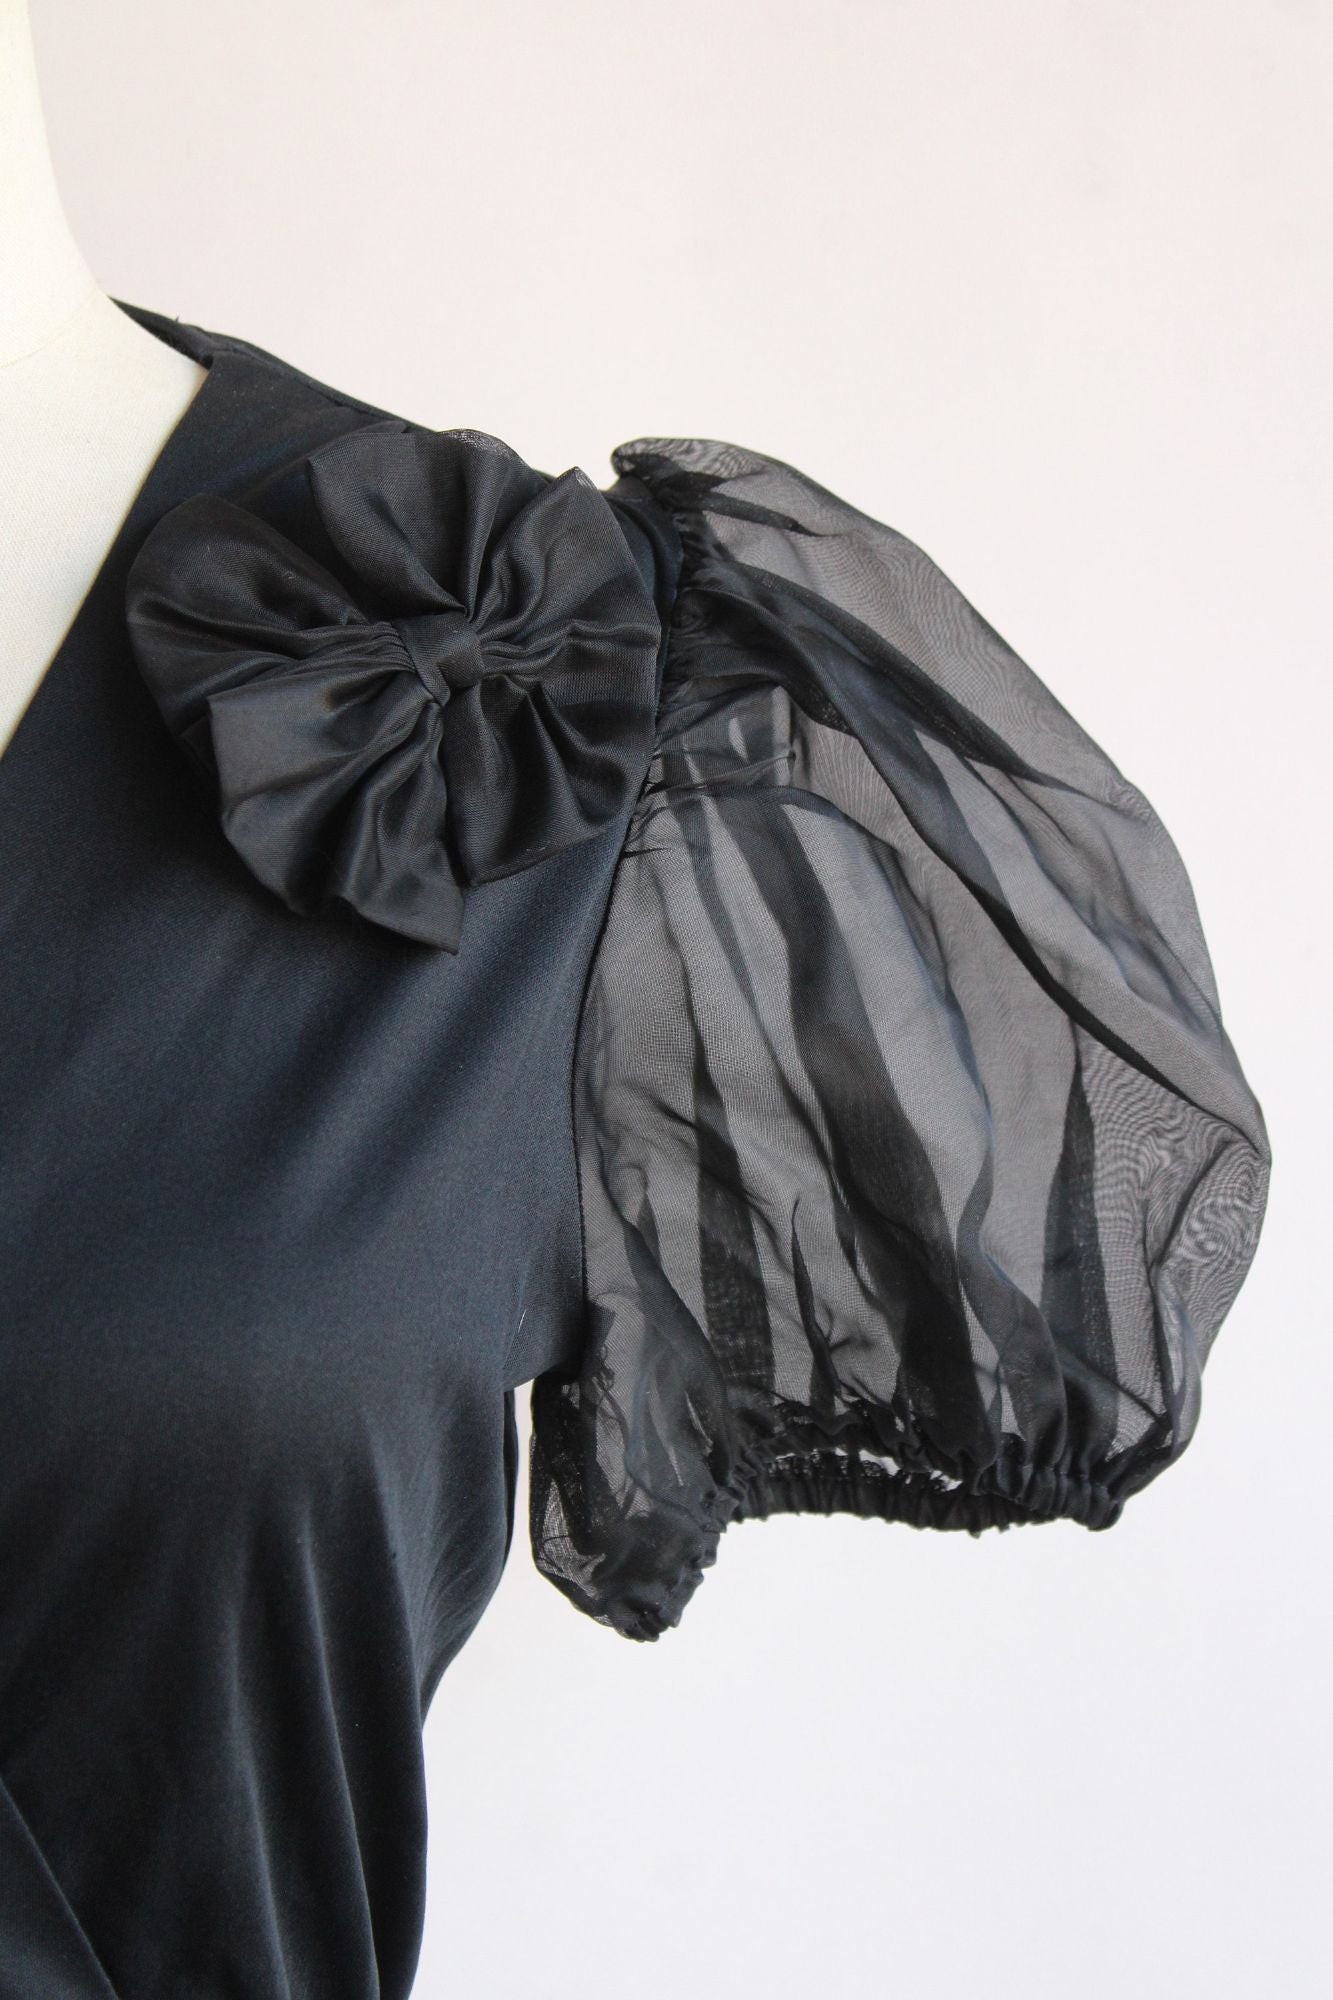 Vintage 1960s Black Nylon Nightgown with Bow and Tie Belt